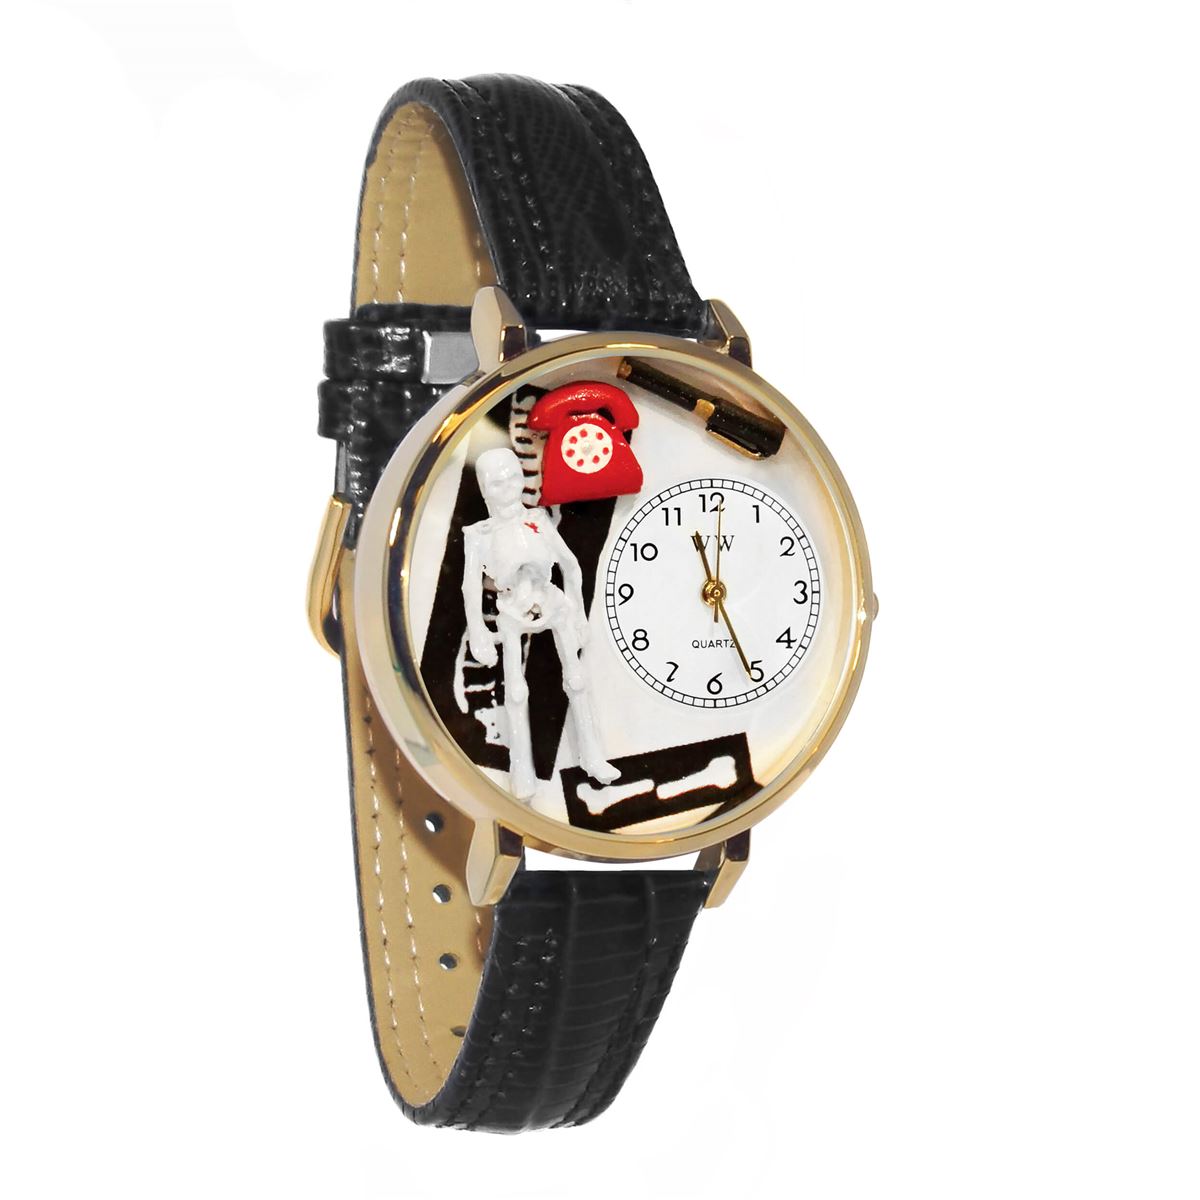 Whimsical Gifts | Orthopedics 3D Watch Large Style | Handmade in USA | Professions Themed | Medical Professions | Novelty Unique Fun Miniatures Gift | Gold Finish Black Leather Watch Band